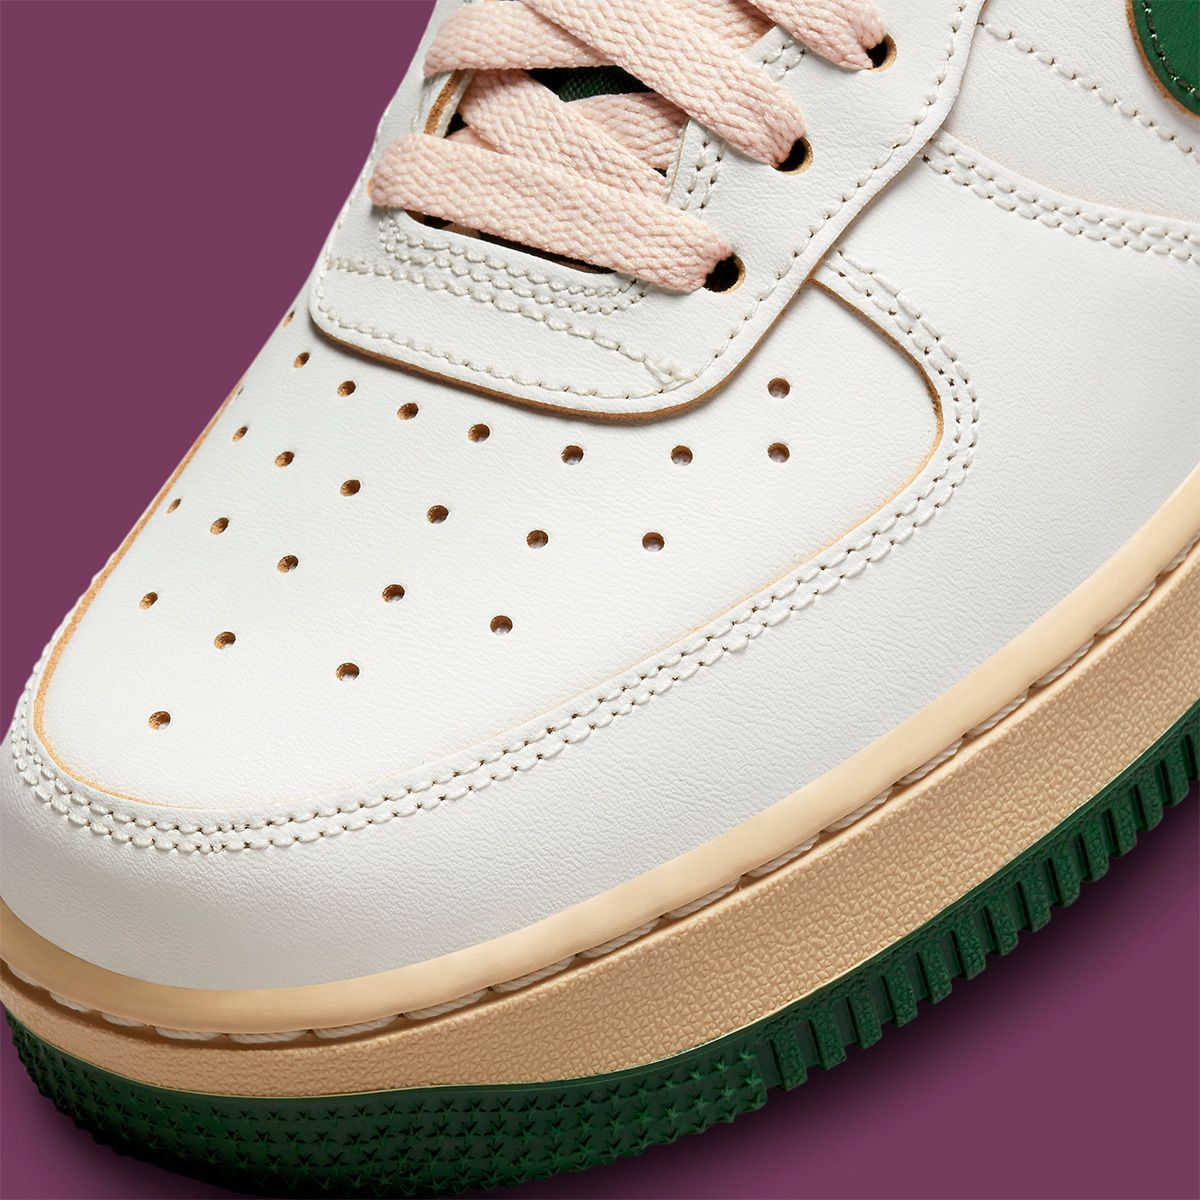 AIR FORCE 1 '07 LV8 Green and Muslin